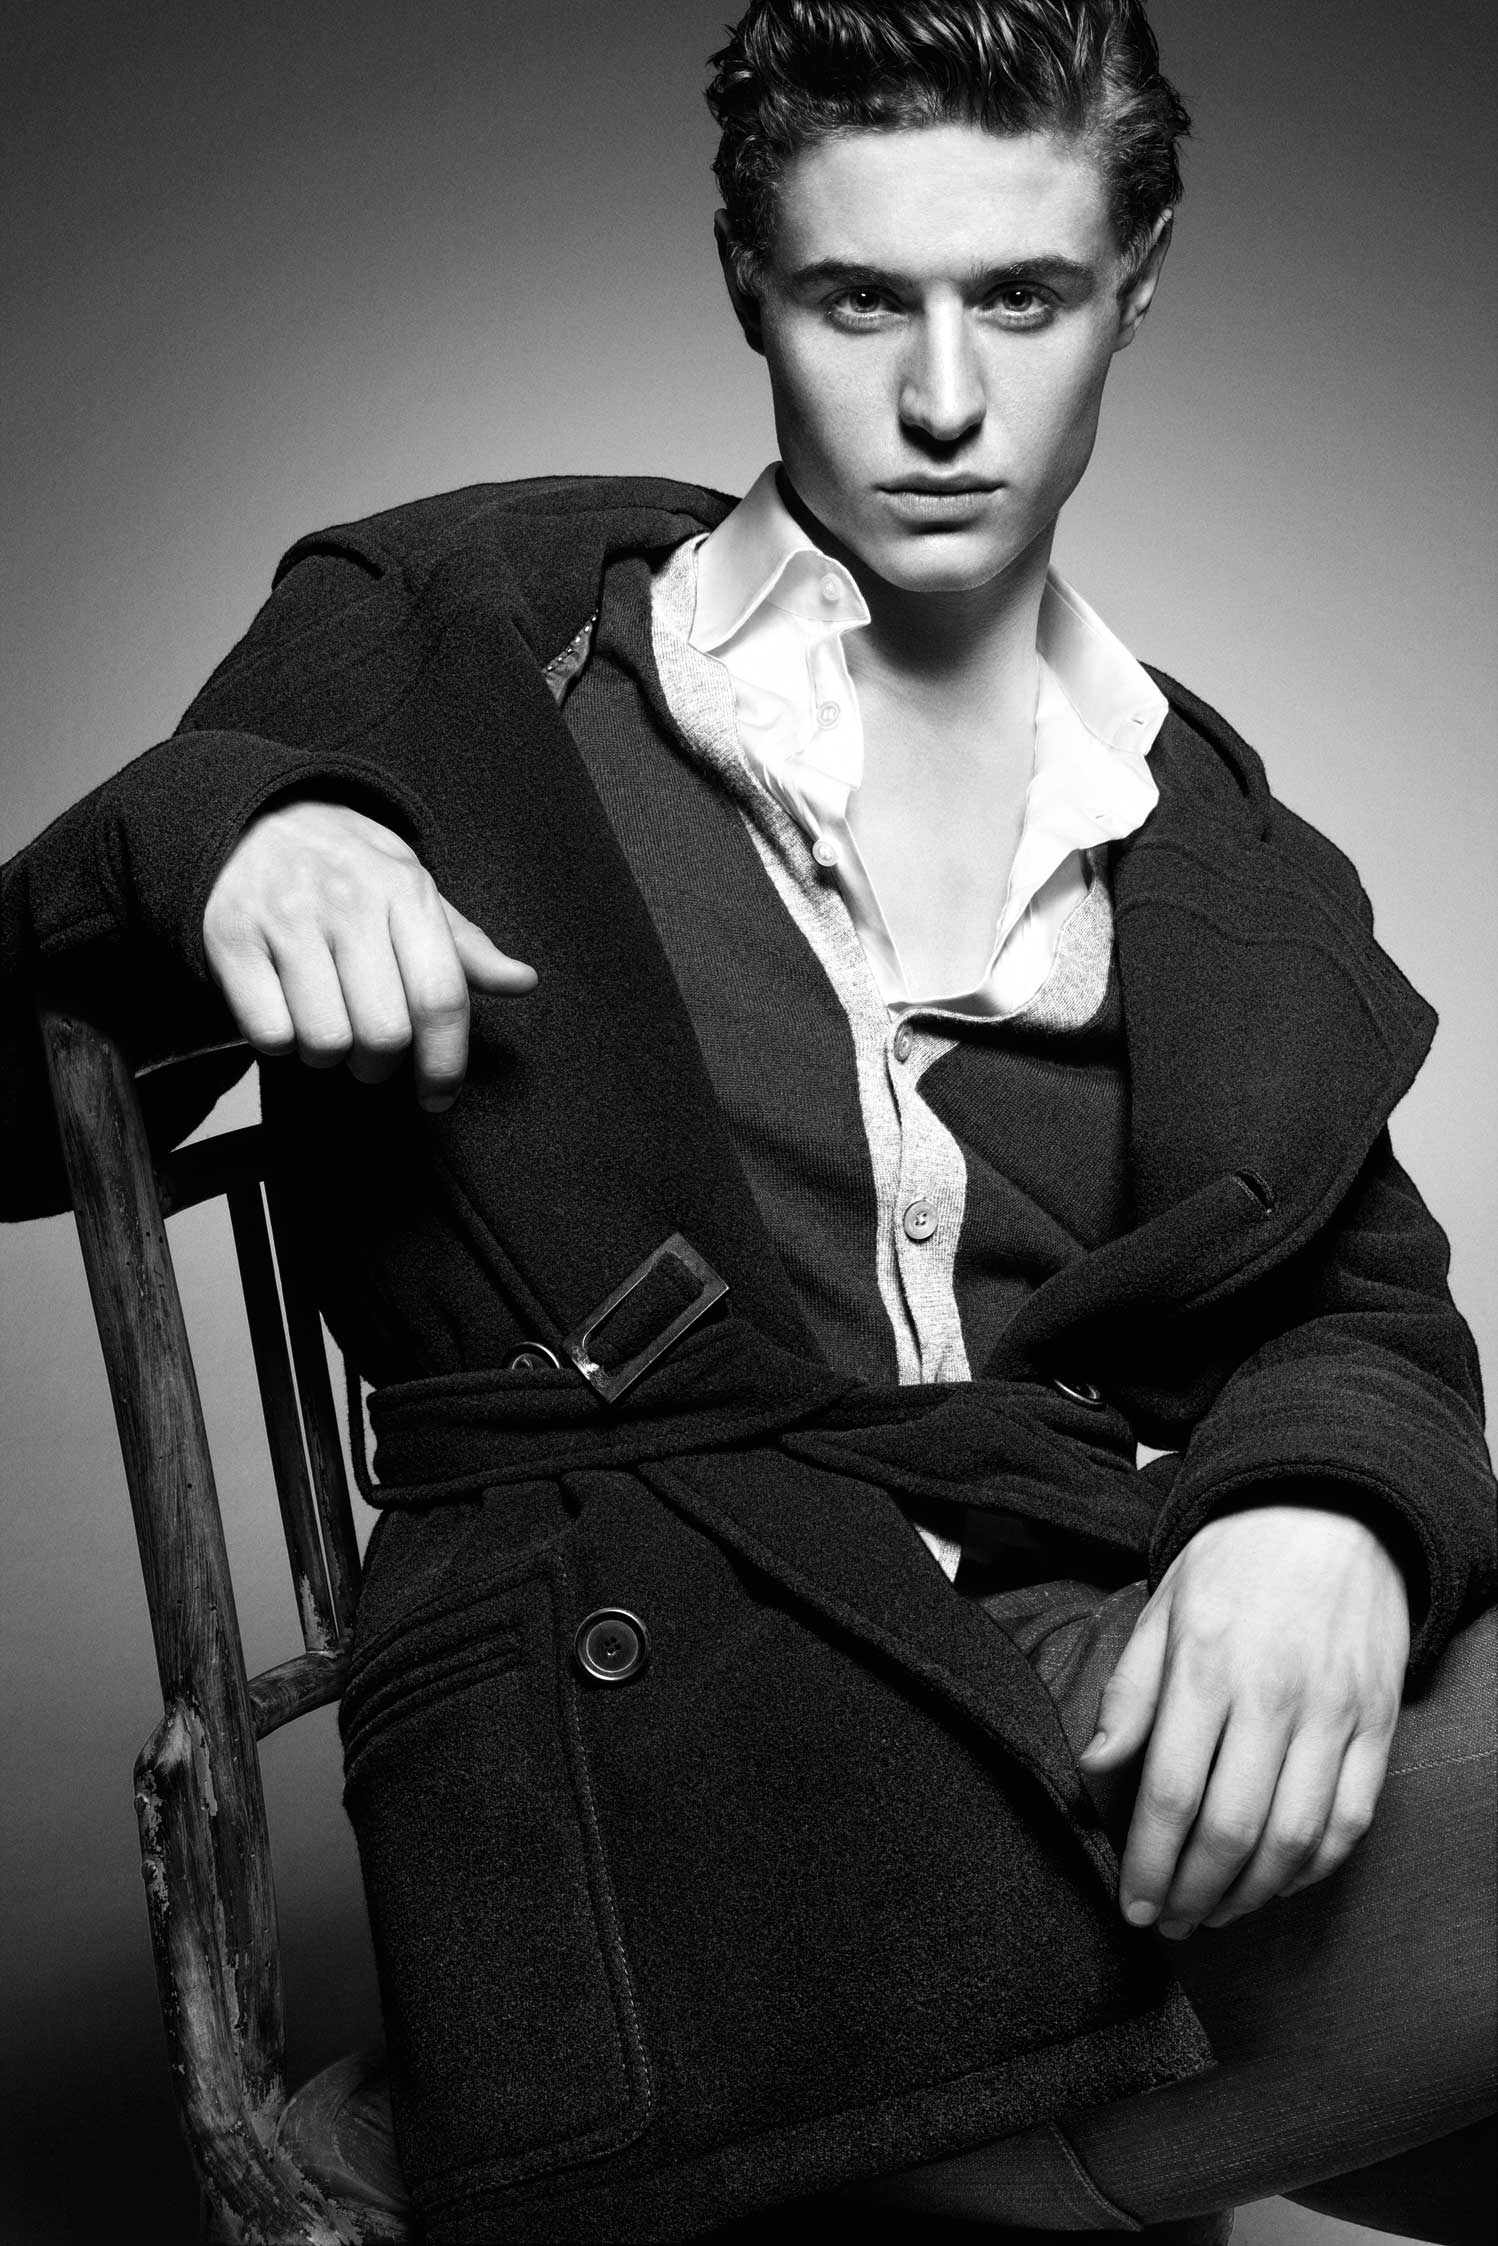 View more photos of Max Irons